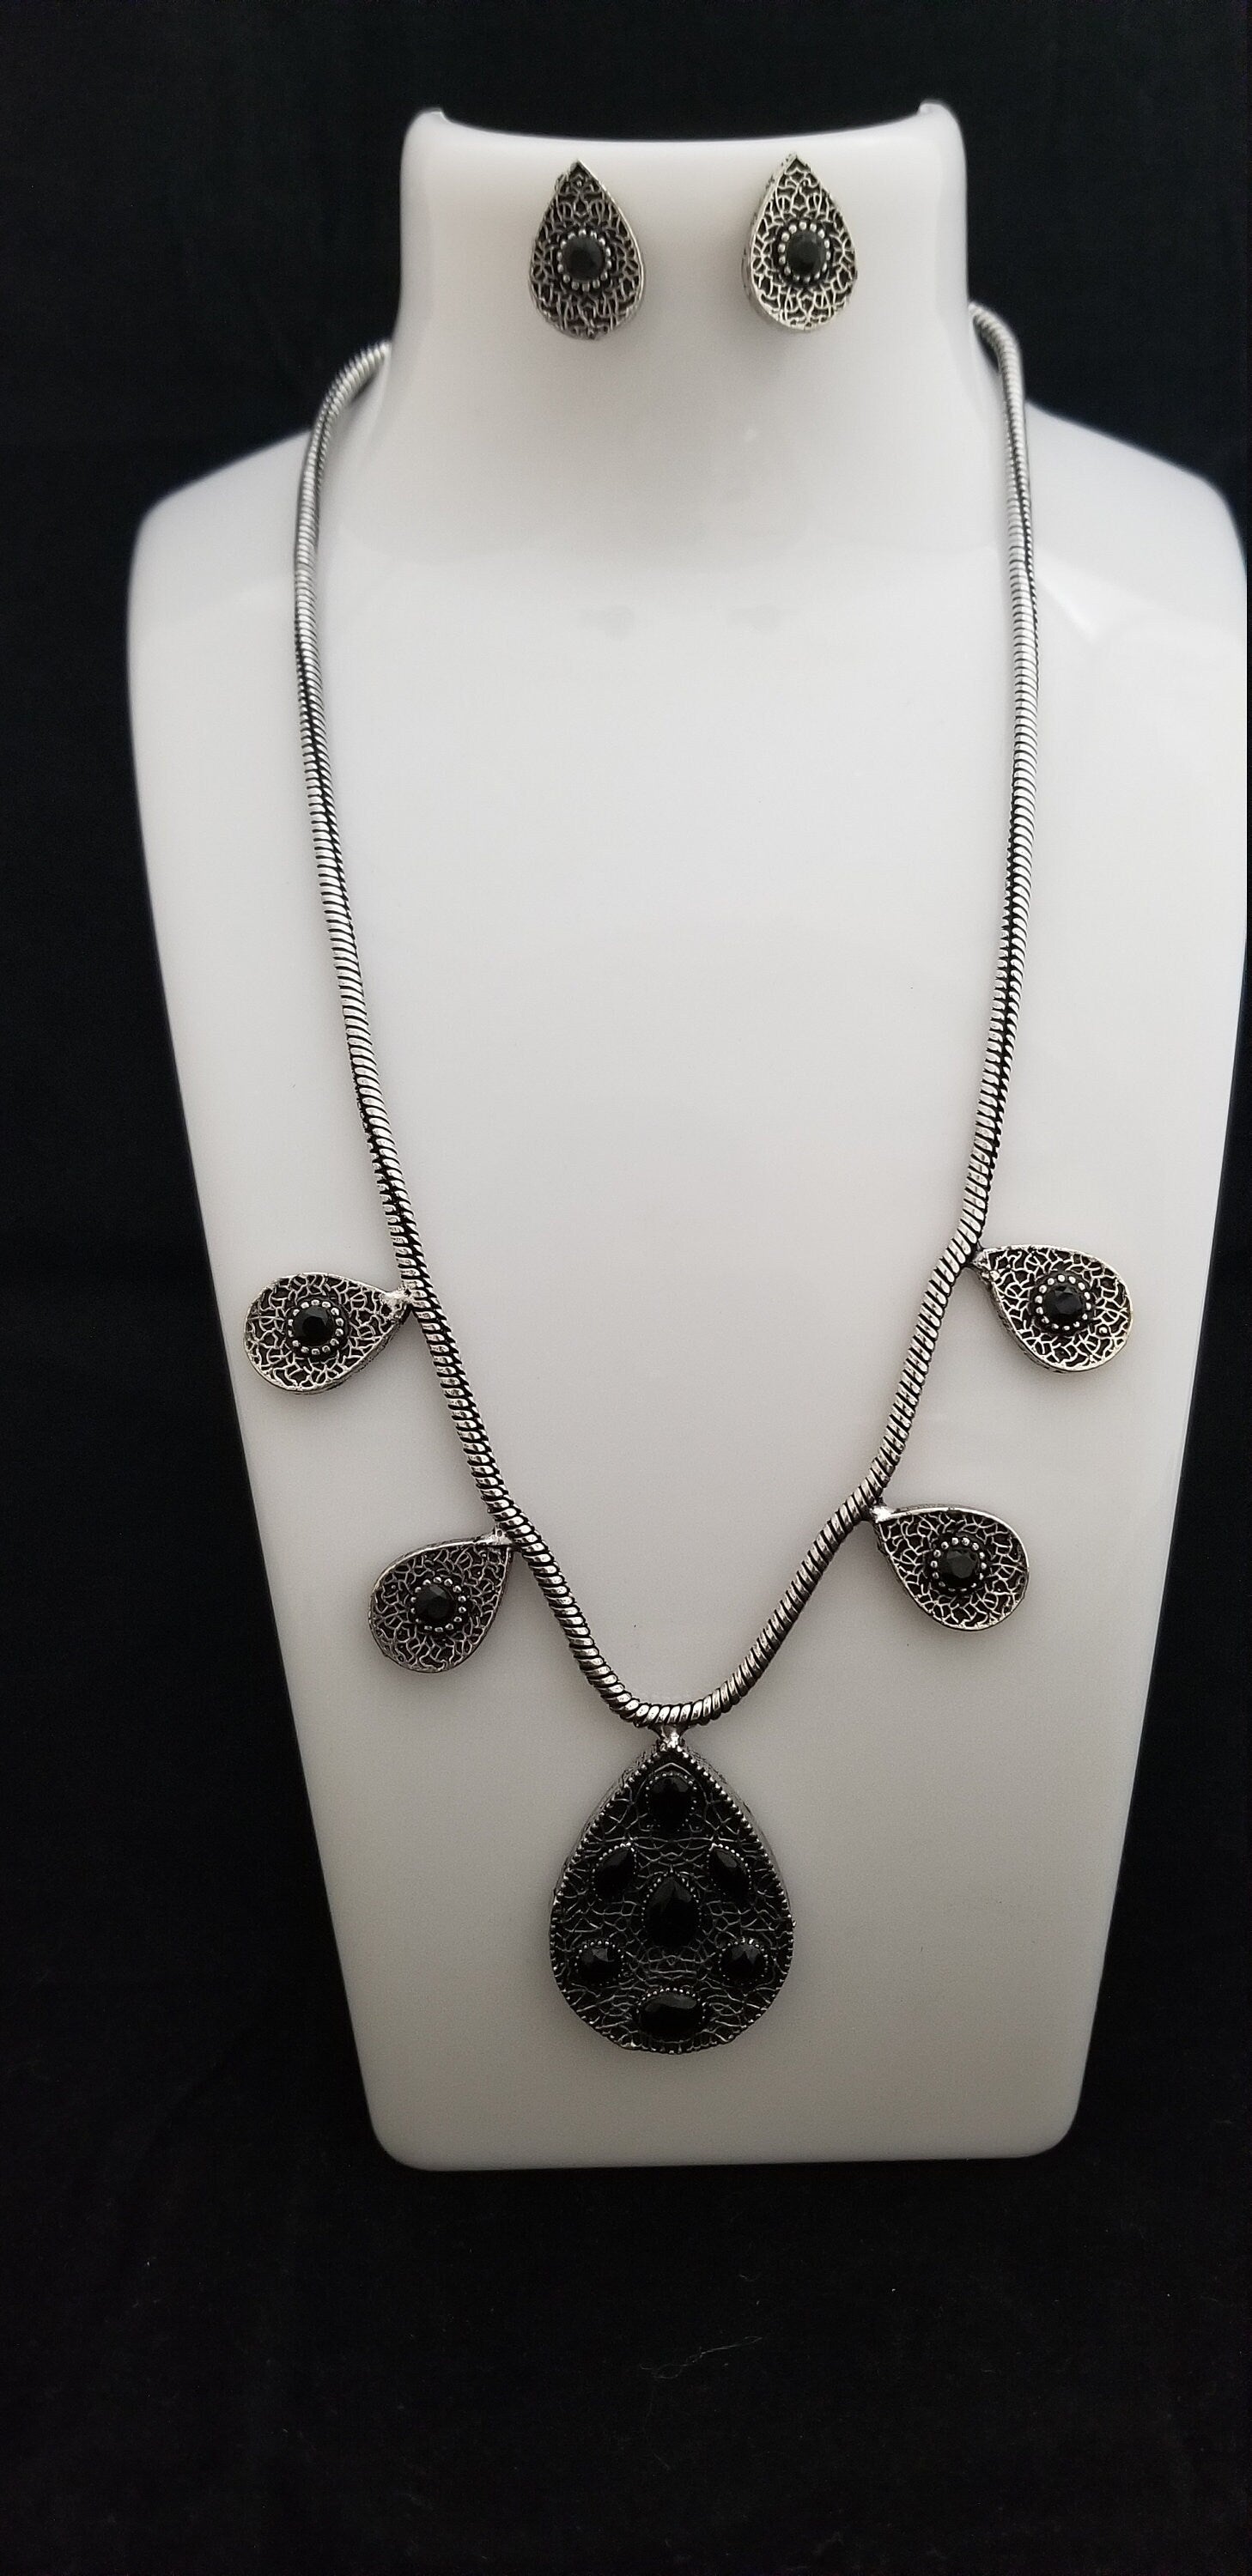 Antique Silver Chain with pendent with black stones and Matching cute earrings